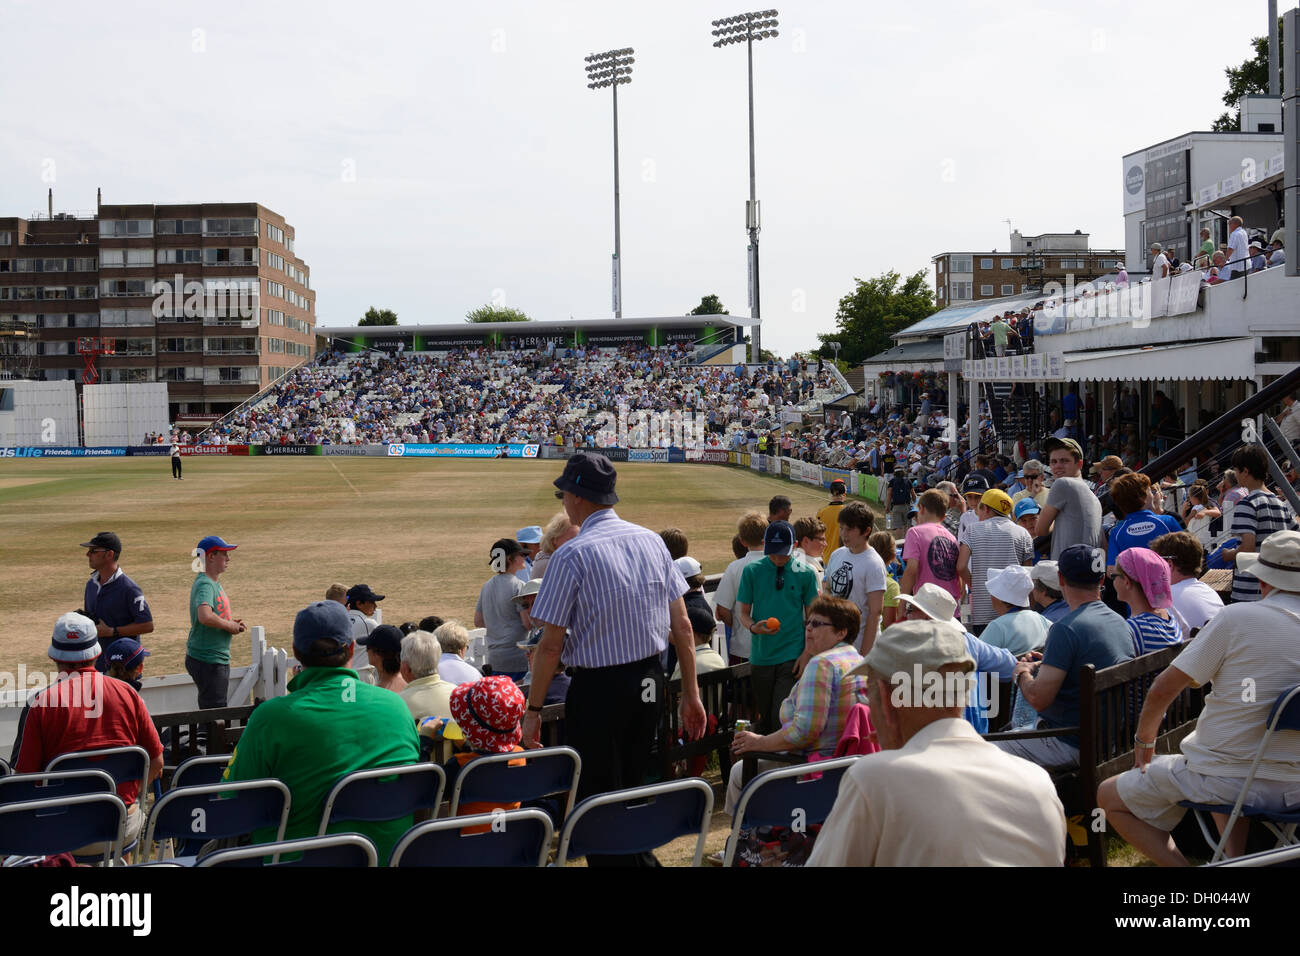 Sussex cricket ground at Brighton and Hove. England versus Australia match. Crowds of spectators. Stock Photo